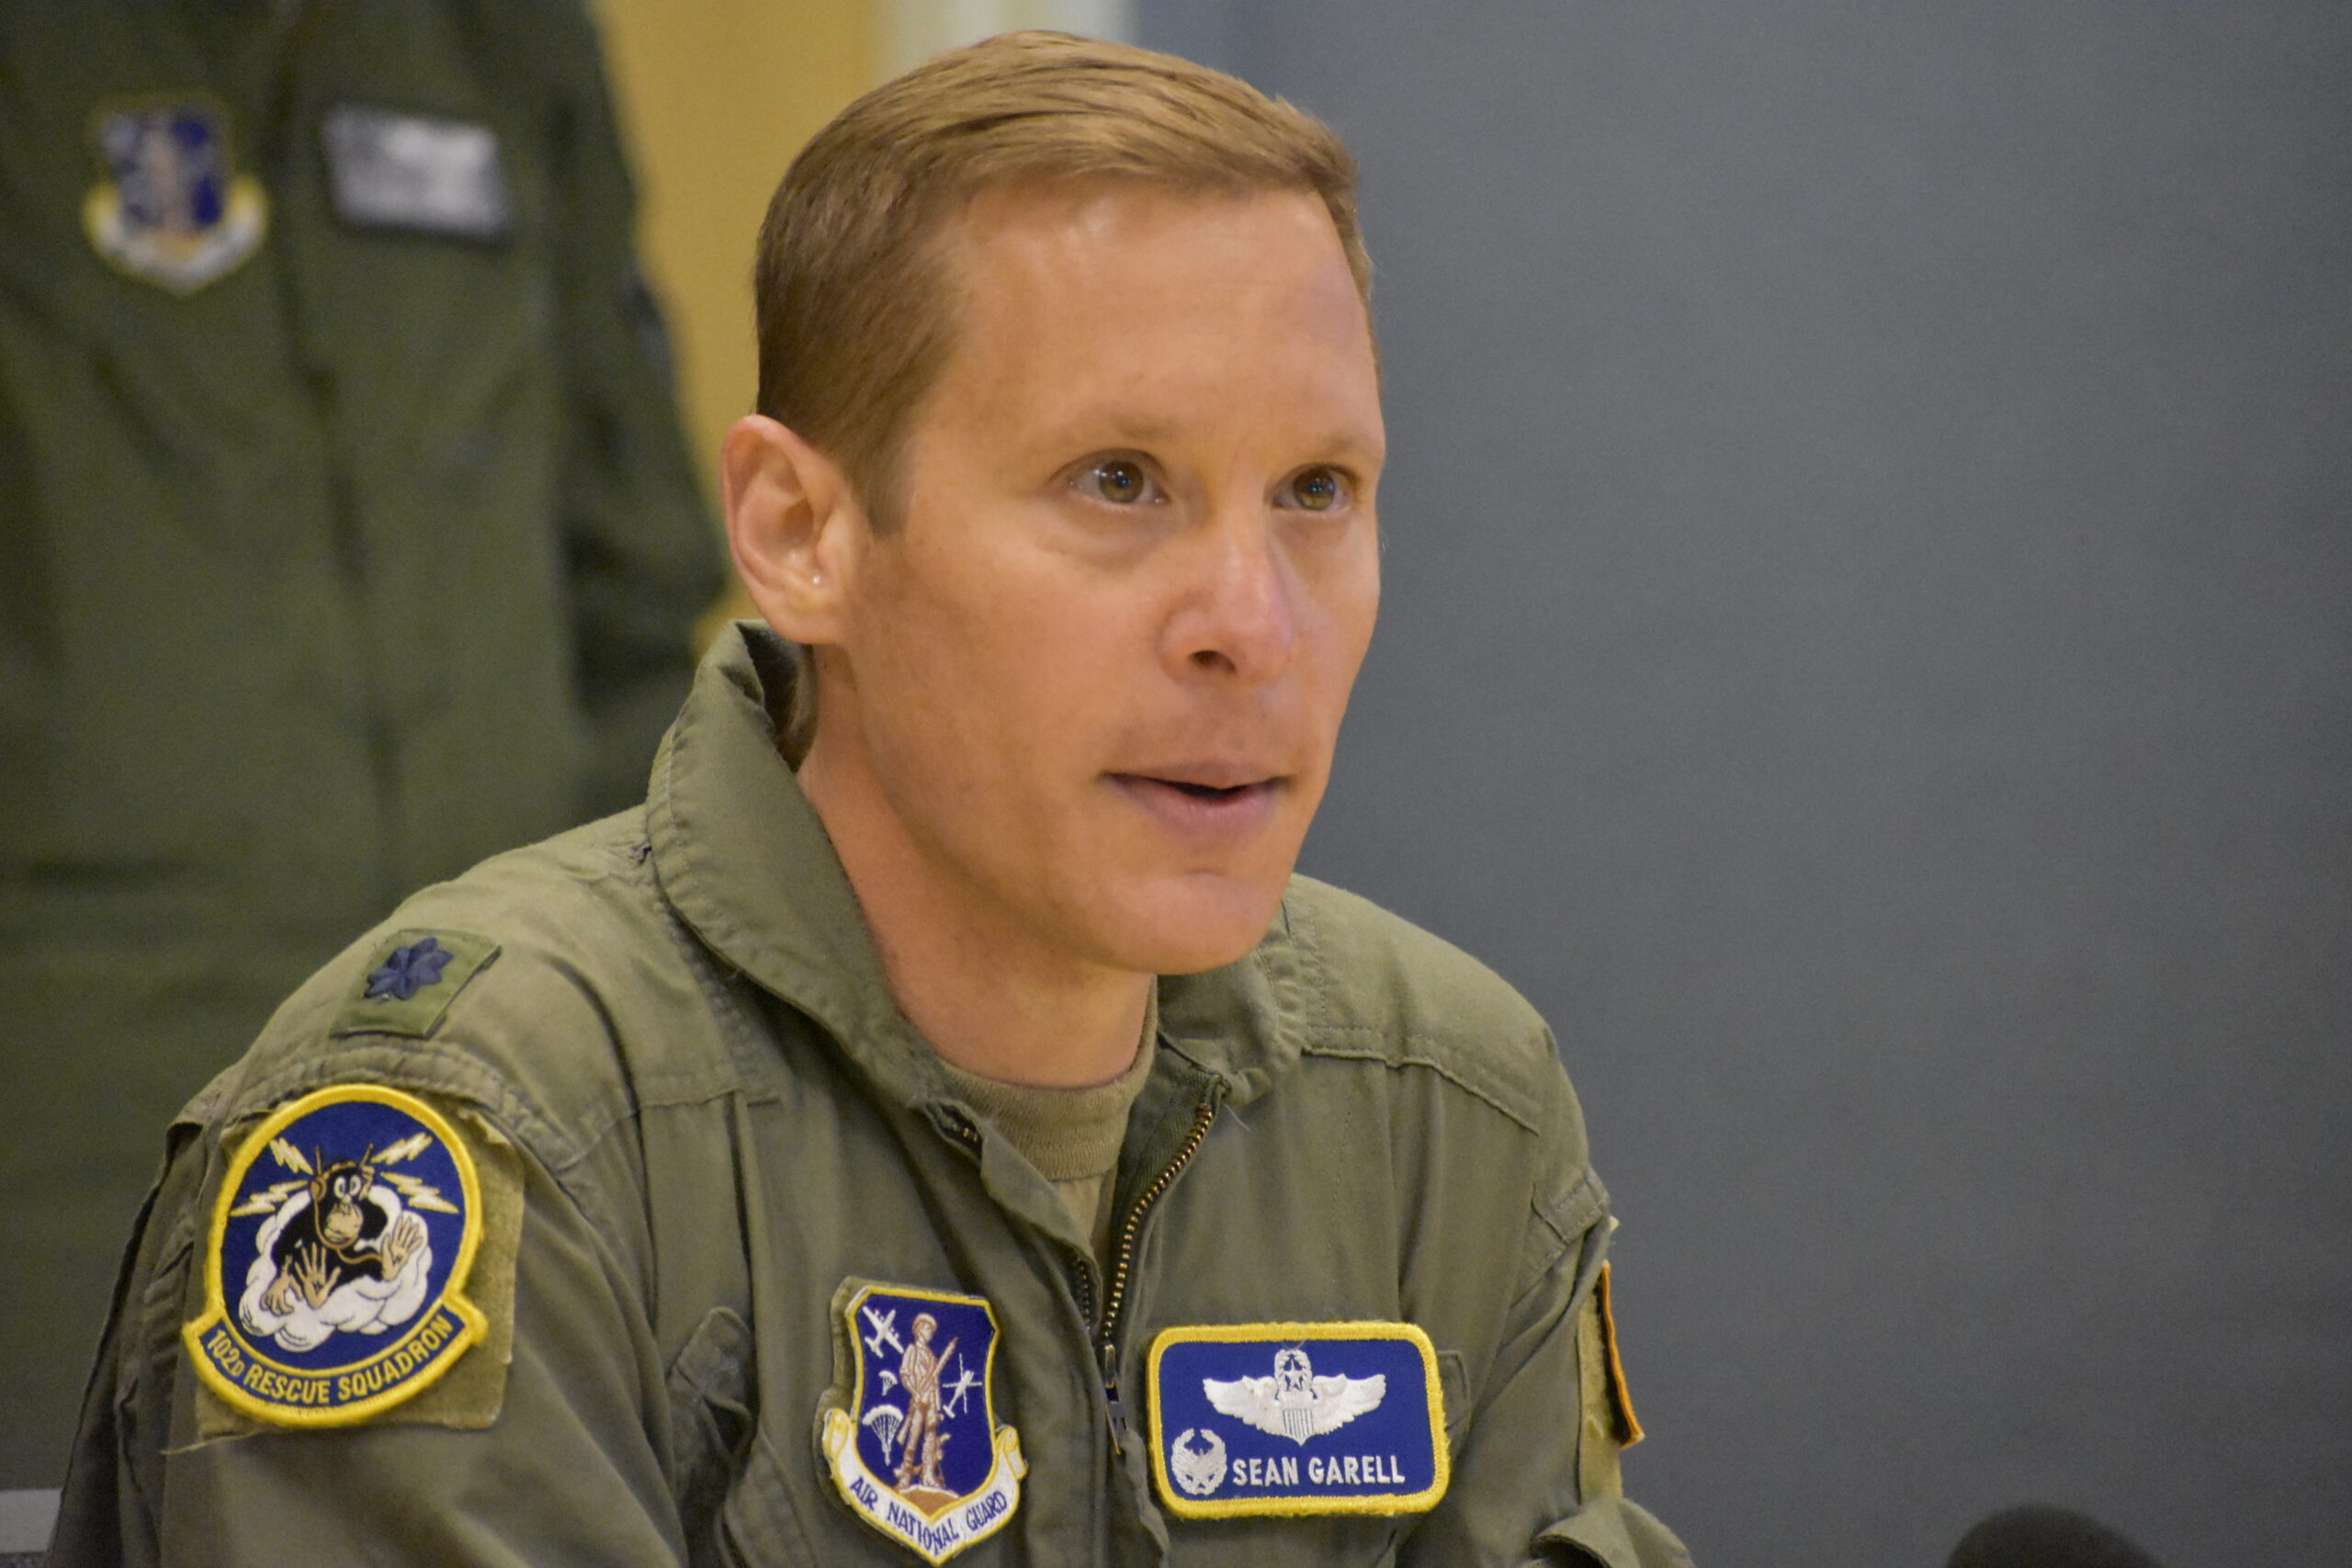 Lt. Col. Sean Garell, commander of the aircraft used in the emergency medical supply drop. BRENDAN J. O'REILLY